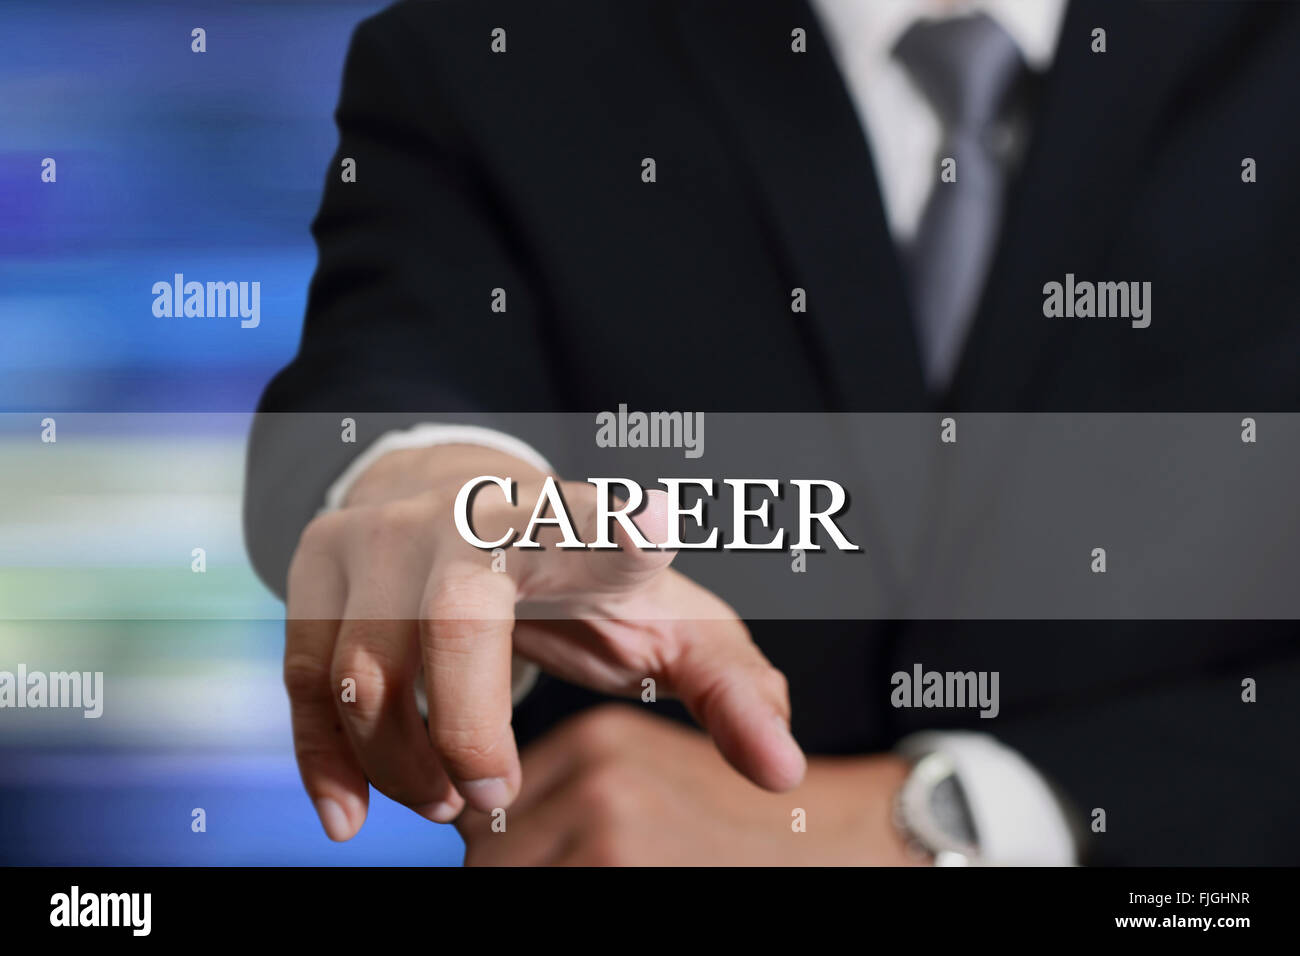 Businessman hands touching CAREER sign on virtual screen as career concept. Stock Photo